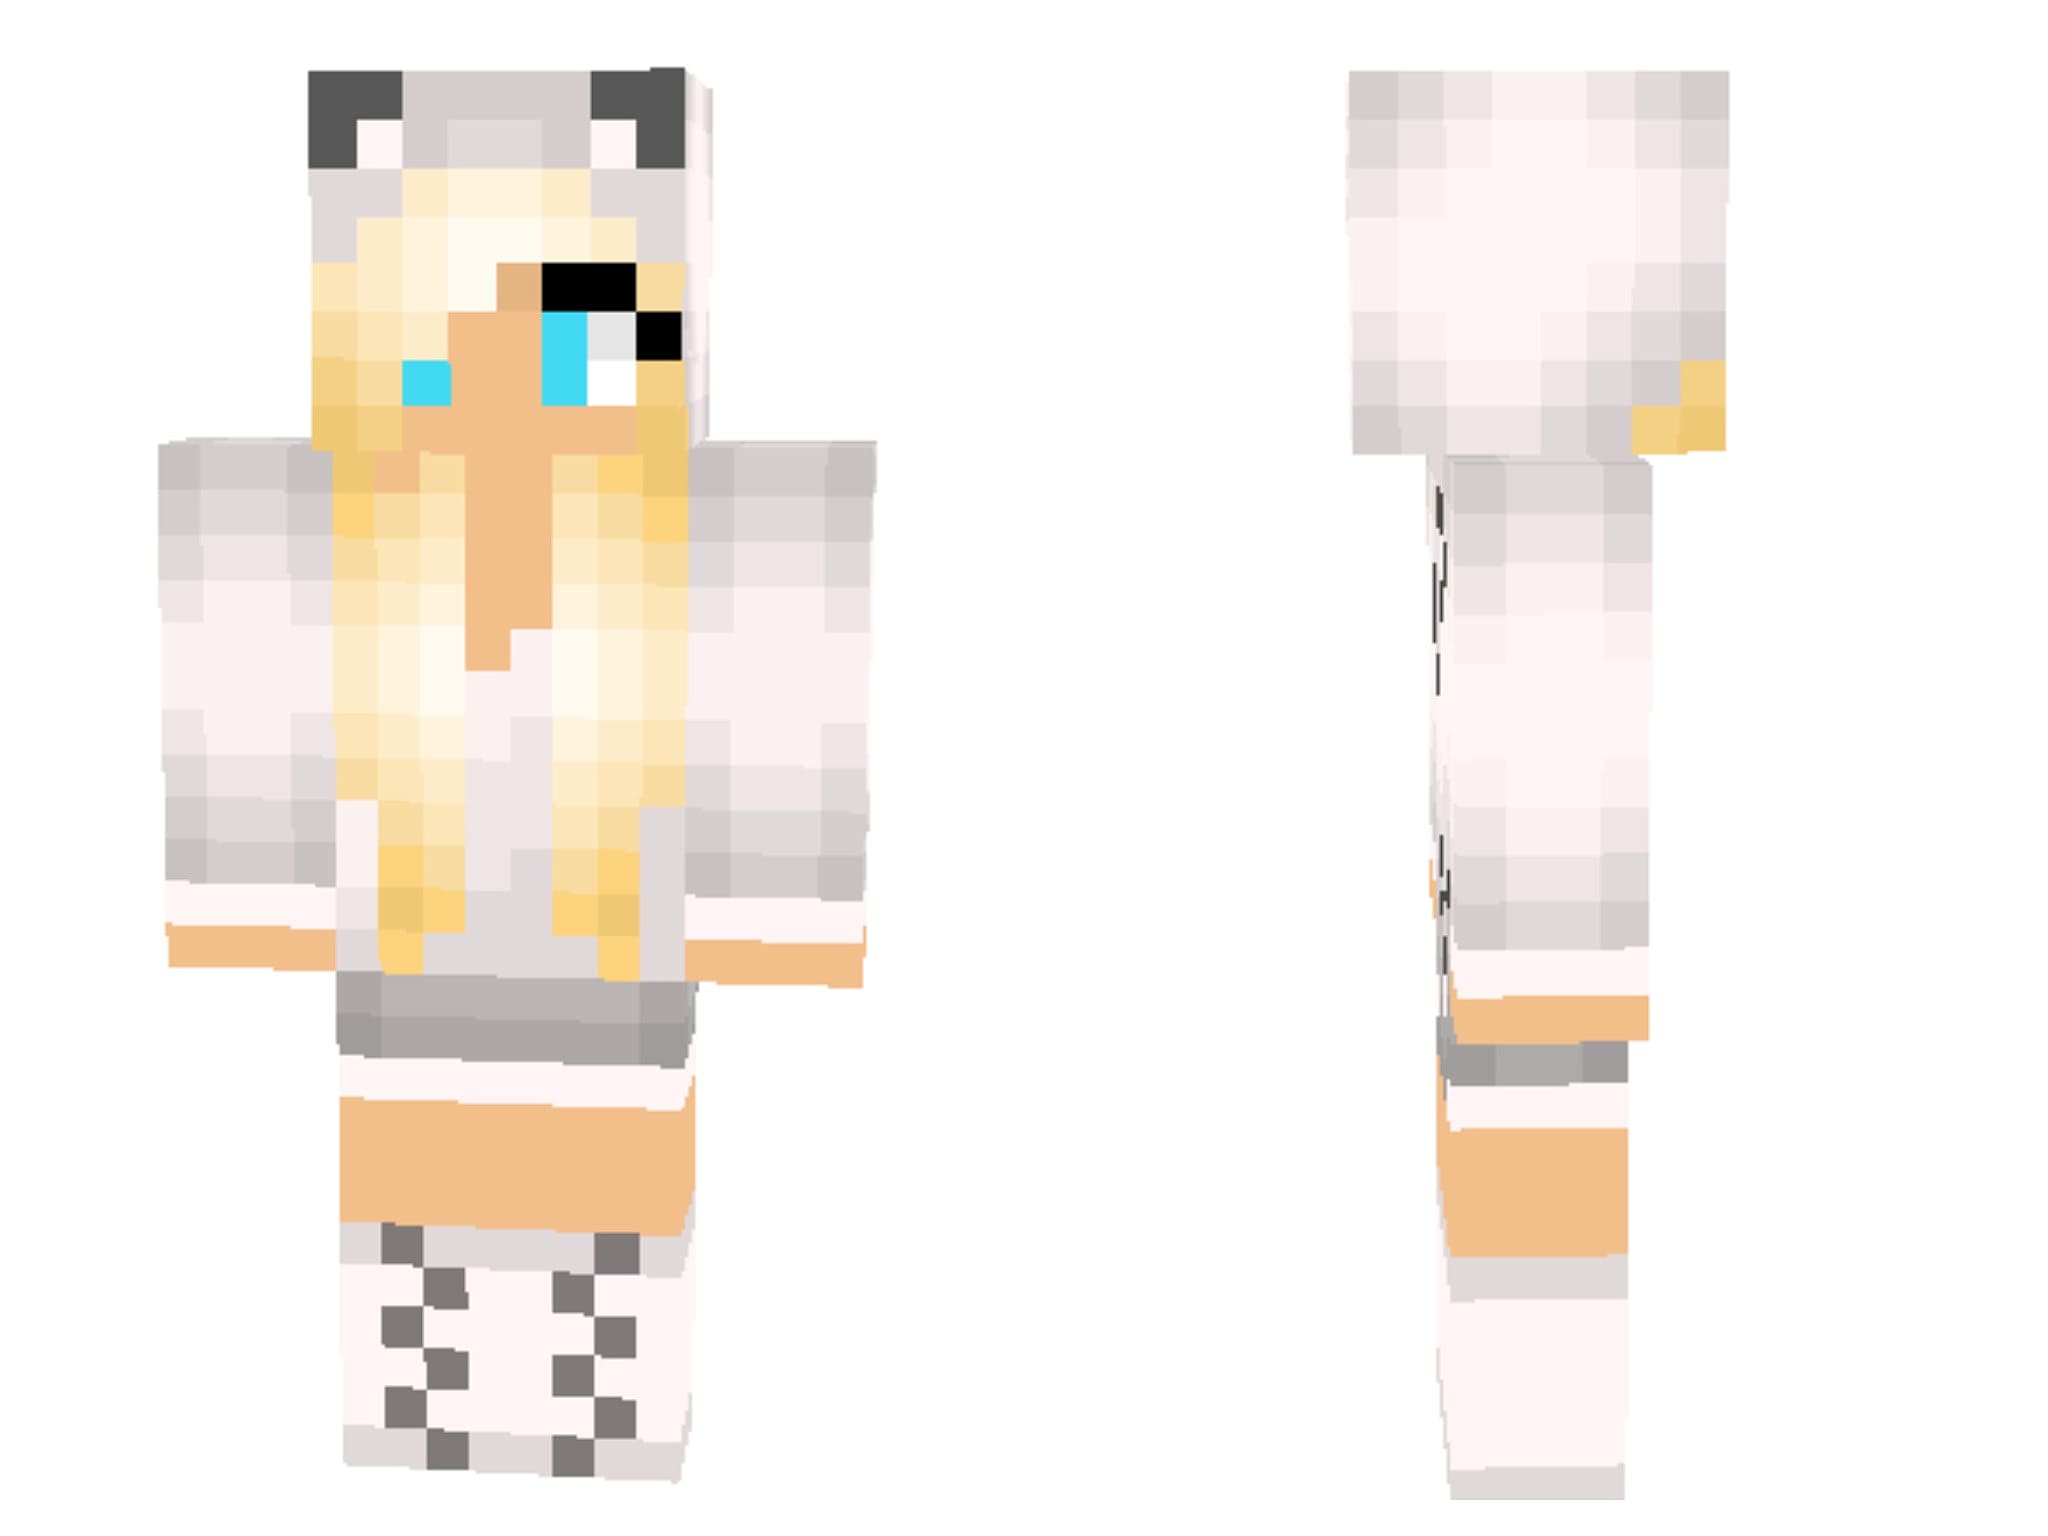 10 Totally Cute Girl Skins for Minecraft  Slide 3  Minecraft